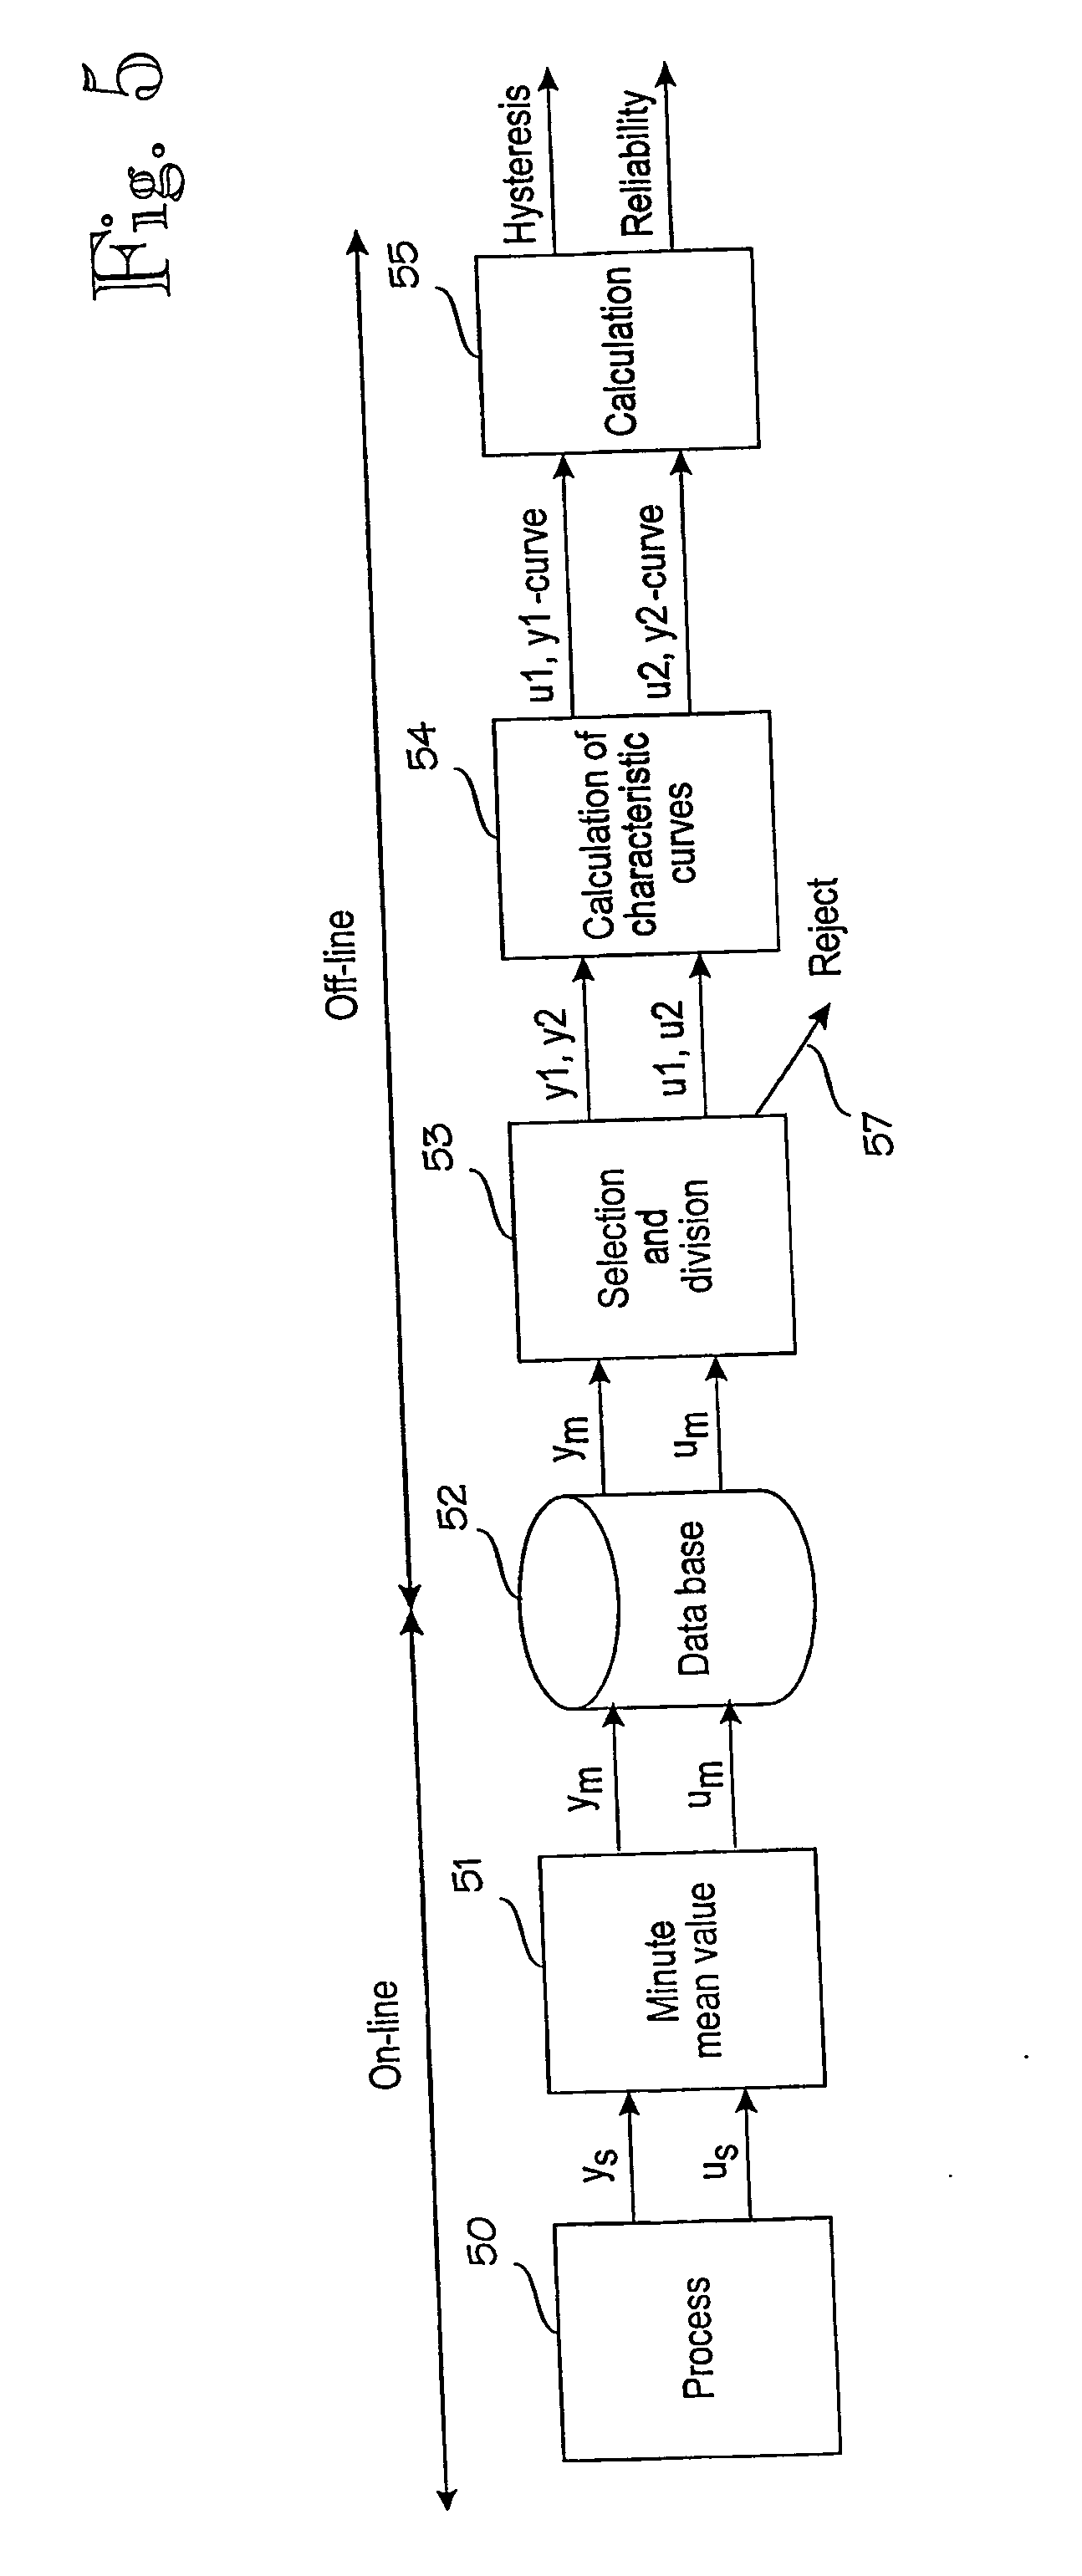 Method and apparatus for determining hysteresis